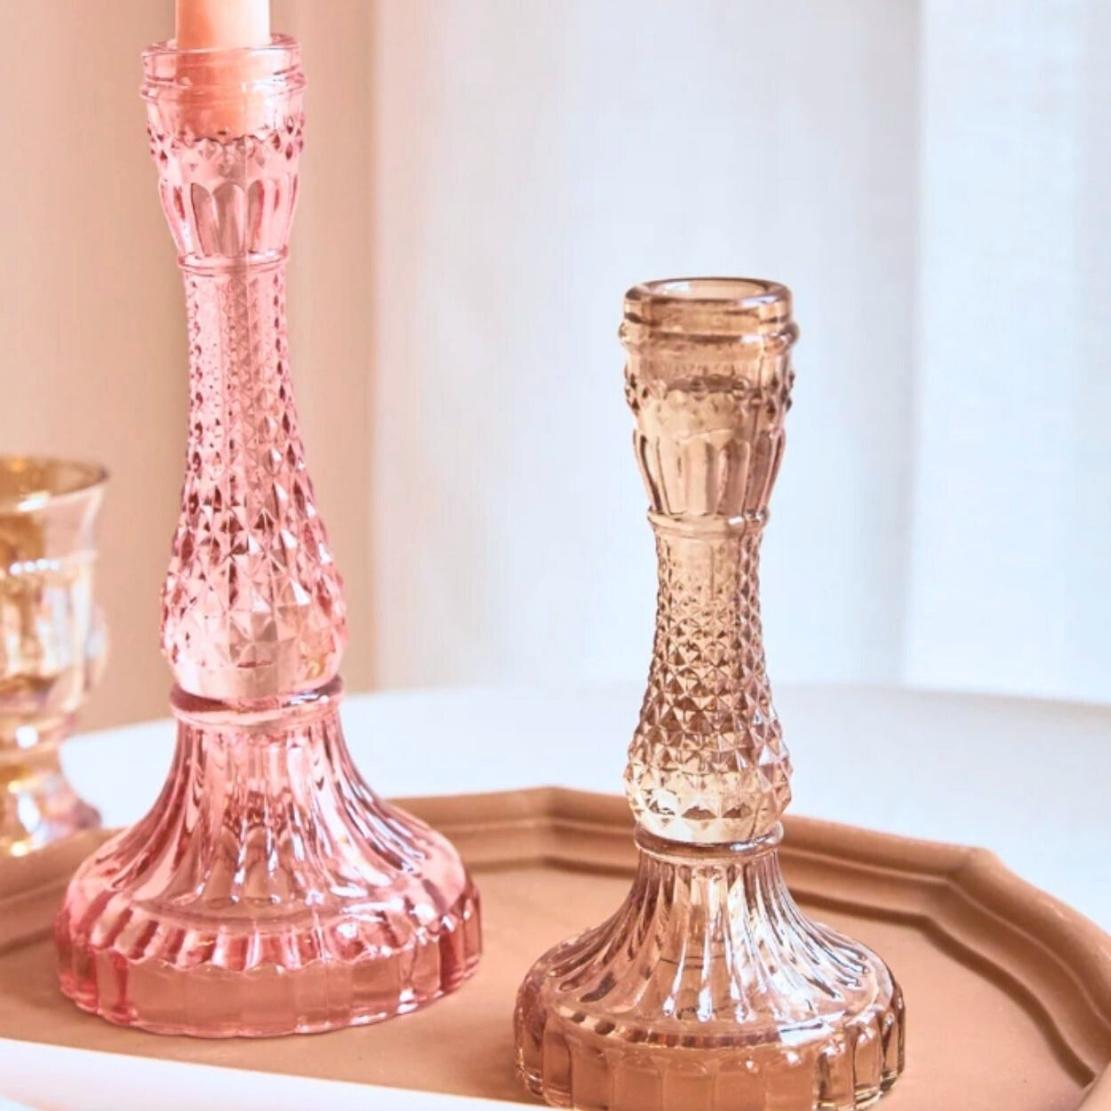 Pink & brown romantic glass candlestick holder